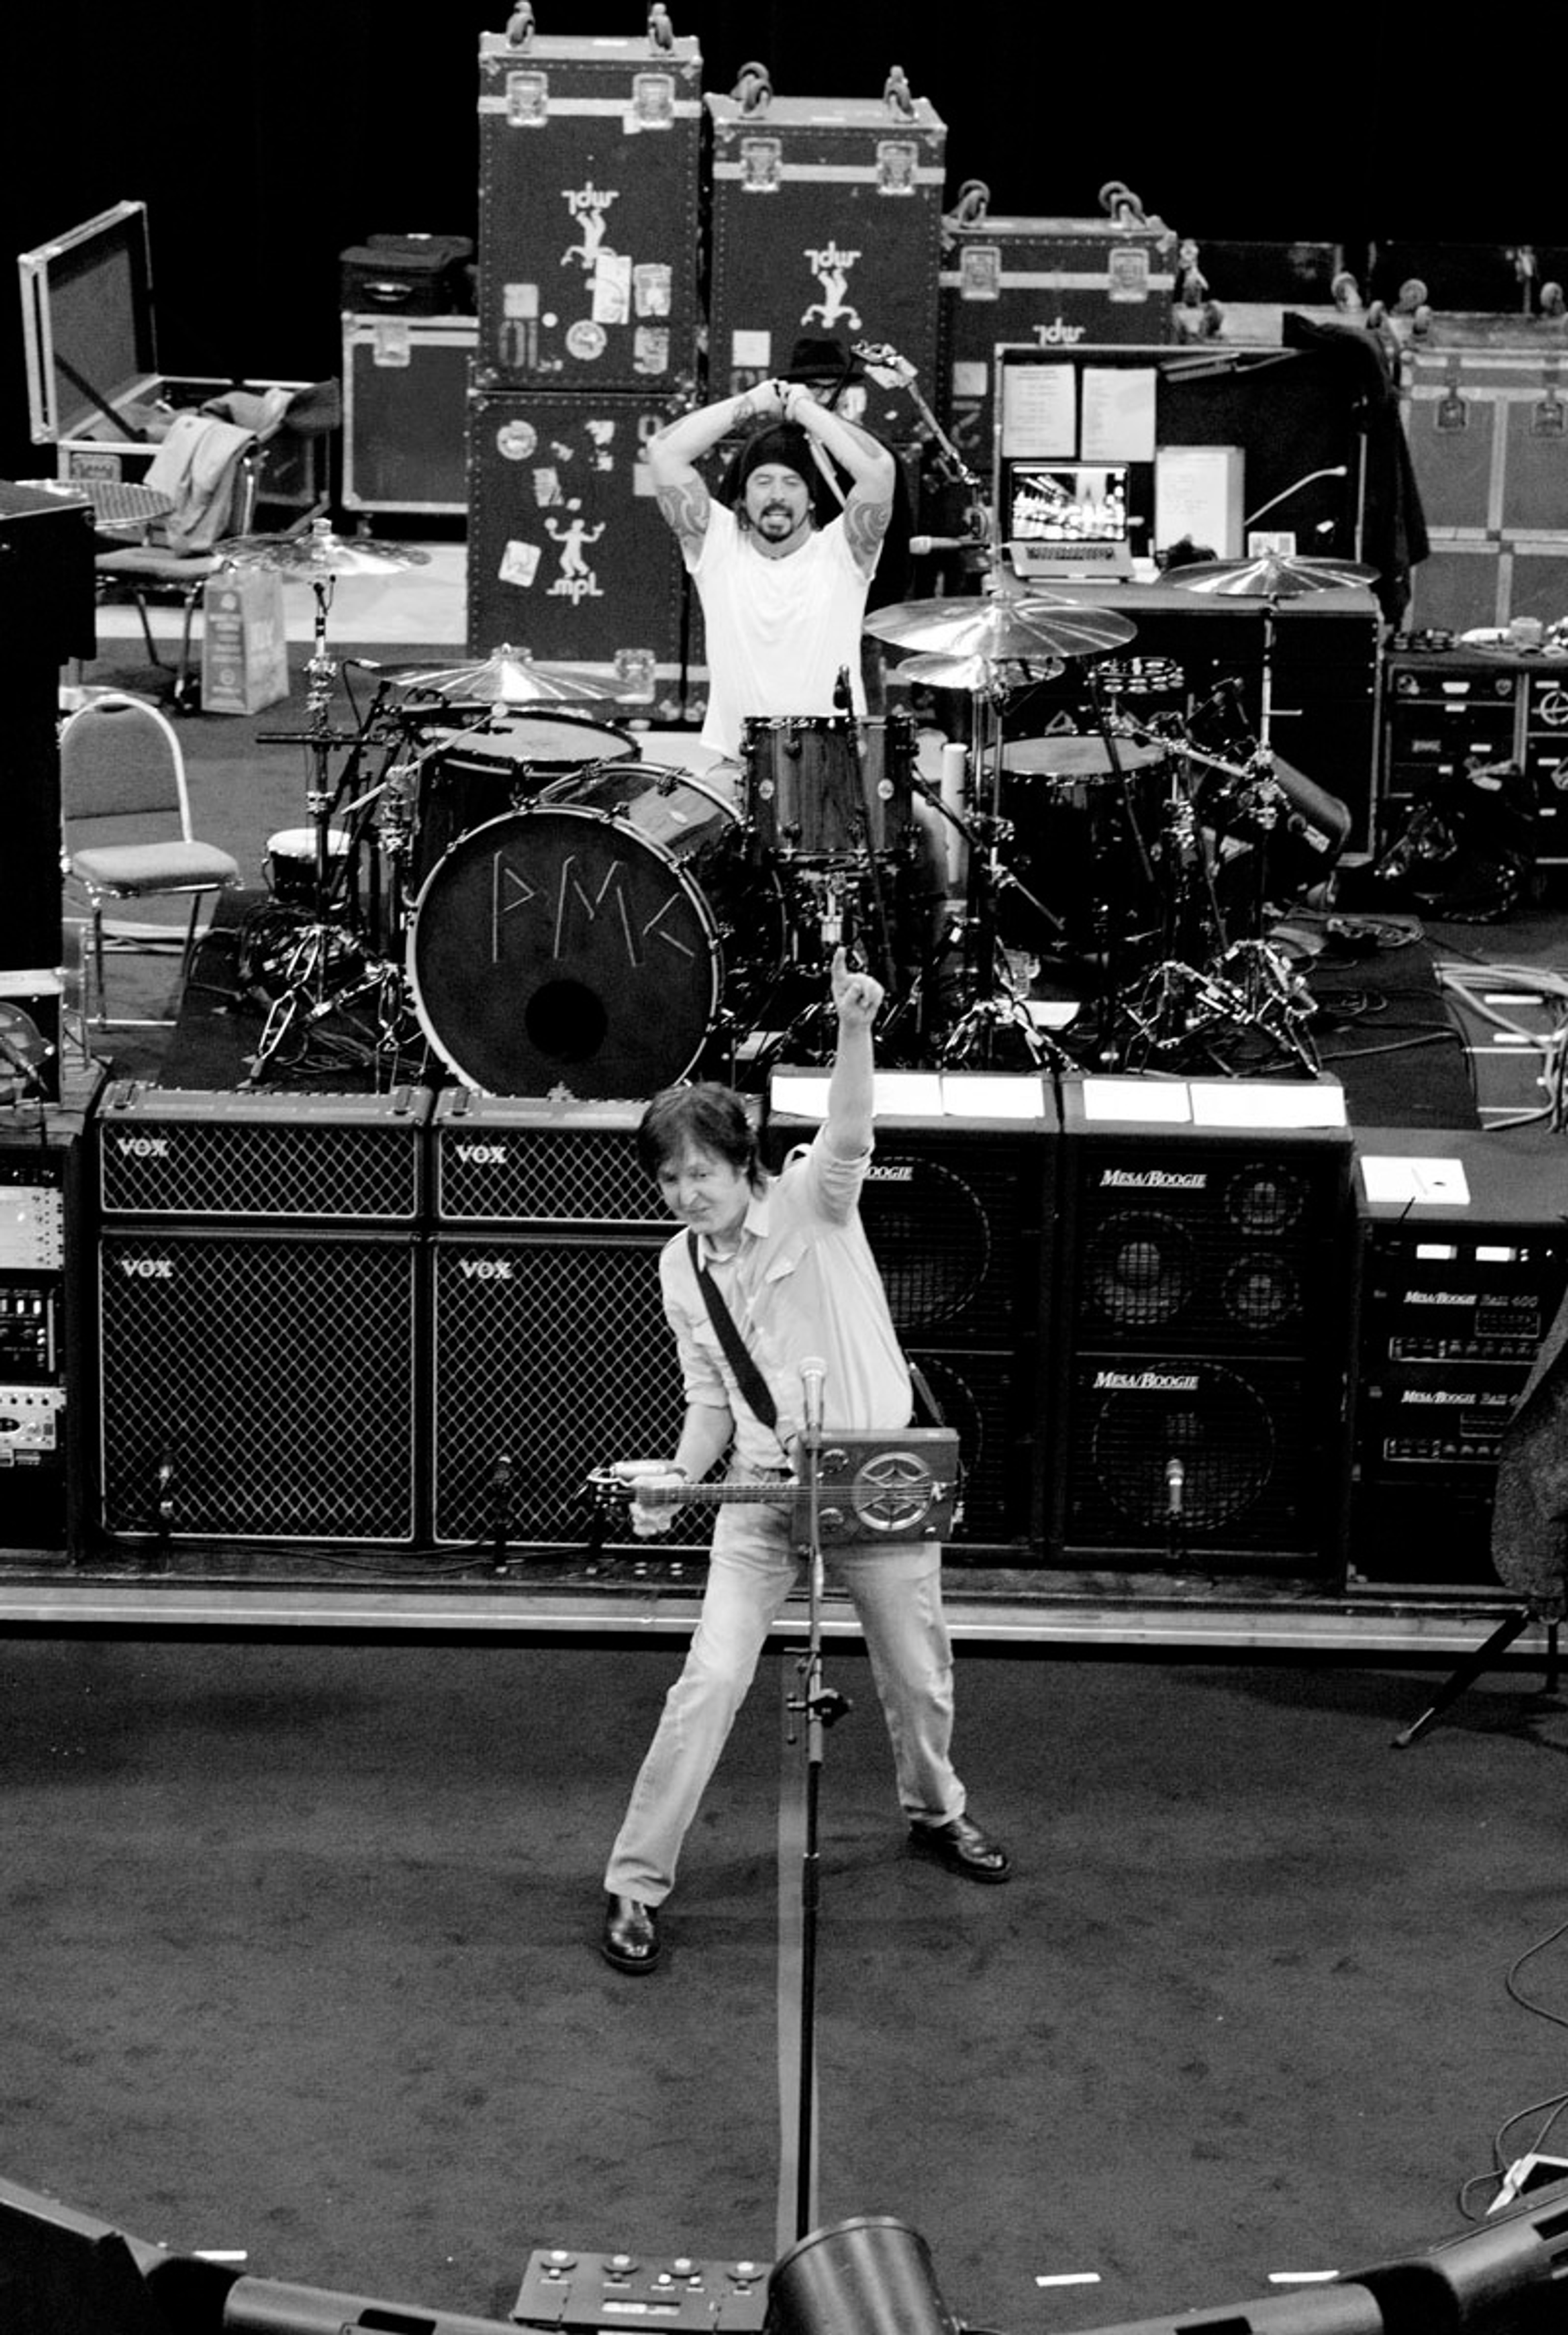 Paul and Dave Grohl at 12-12-12 rehearsals, 12-12-12 Hurricane Sandy Benefit, Madison Square Garden, NYC, 10th December 2012